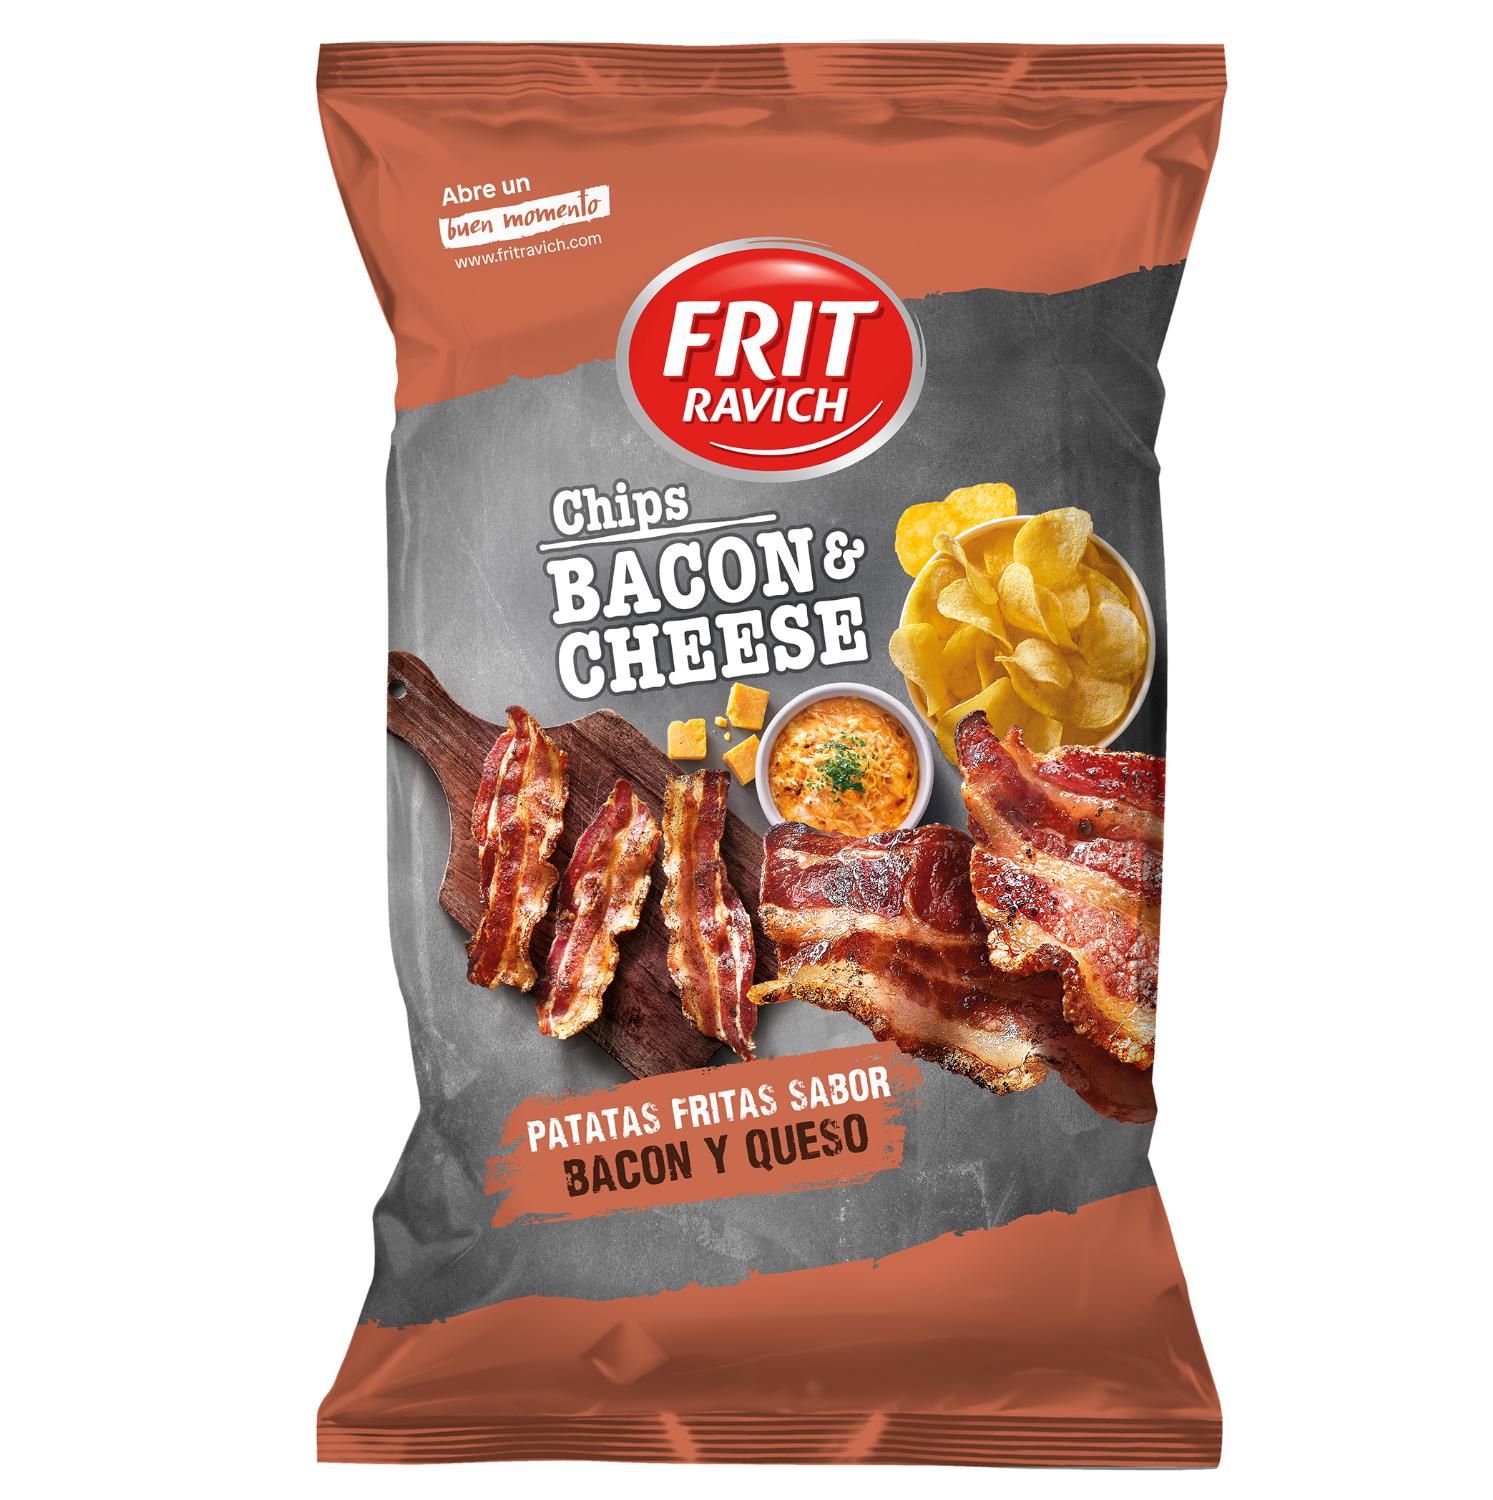 chips bacon&cheese frit ravich 125g